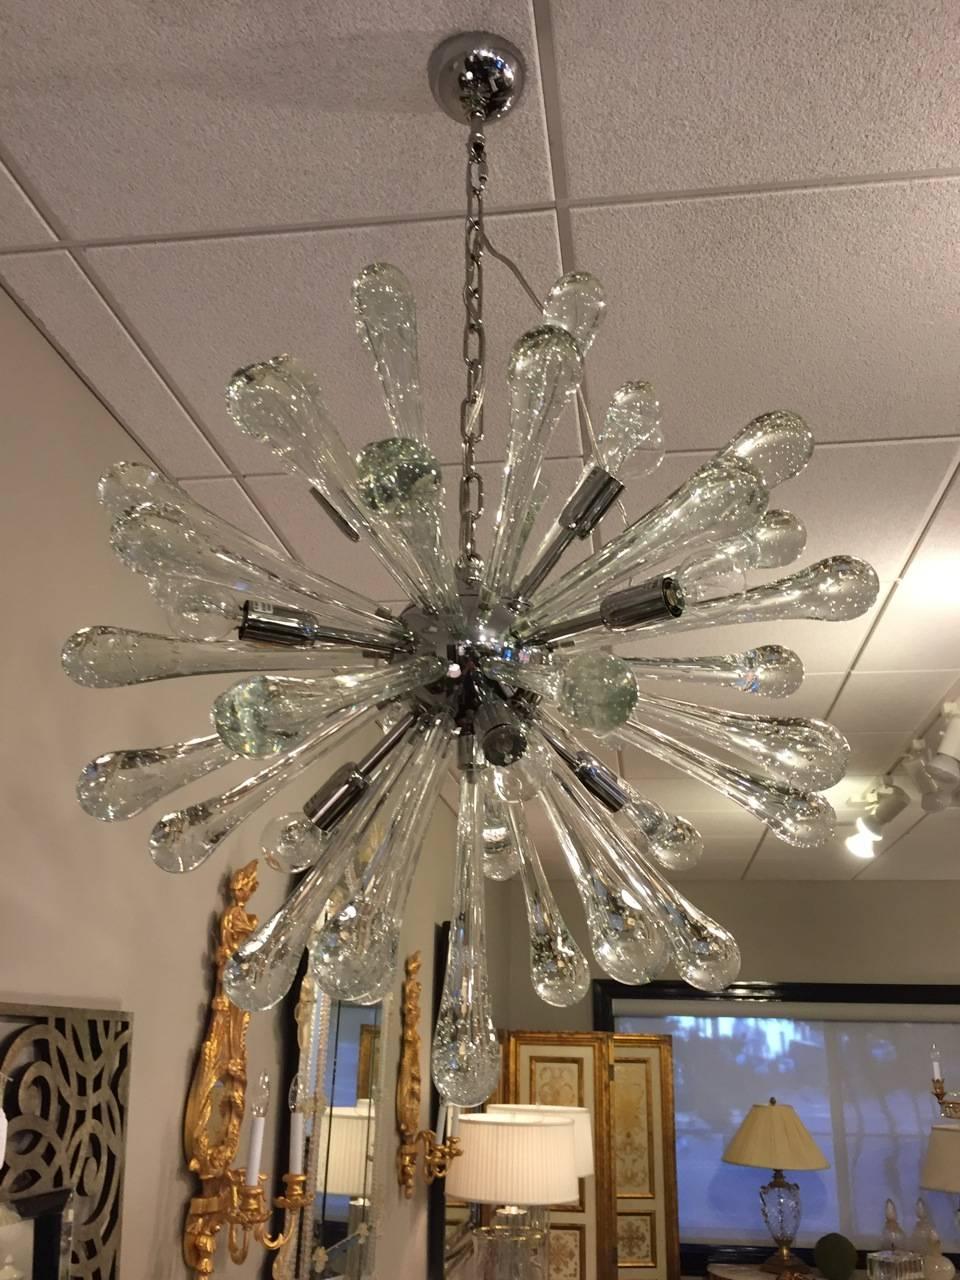 Exquiste pair of handblown, Italian Mid-Century Modern style Venetian glass from Murano in the form of a Sputnik or sunburst. Each arm flares out from a central stem and ends in bulb form. The clear glass itself is clean and delicate with small